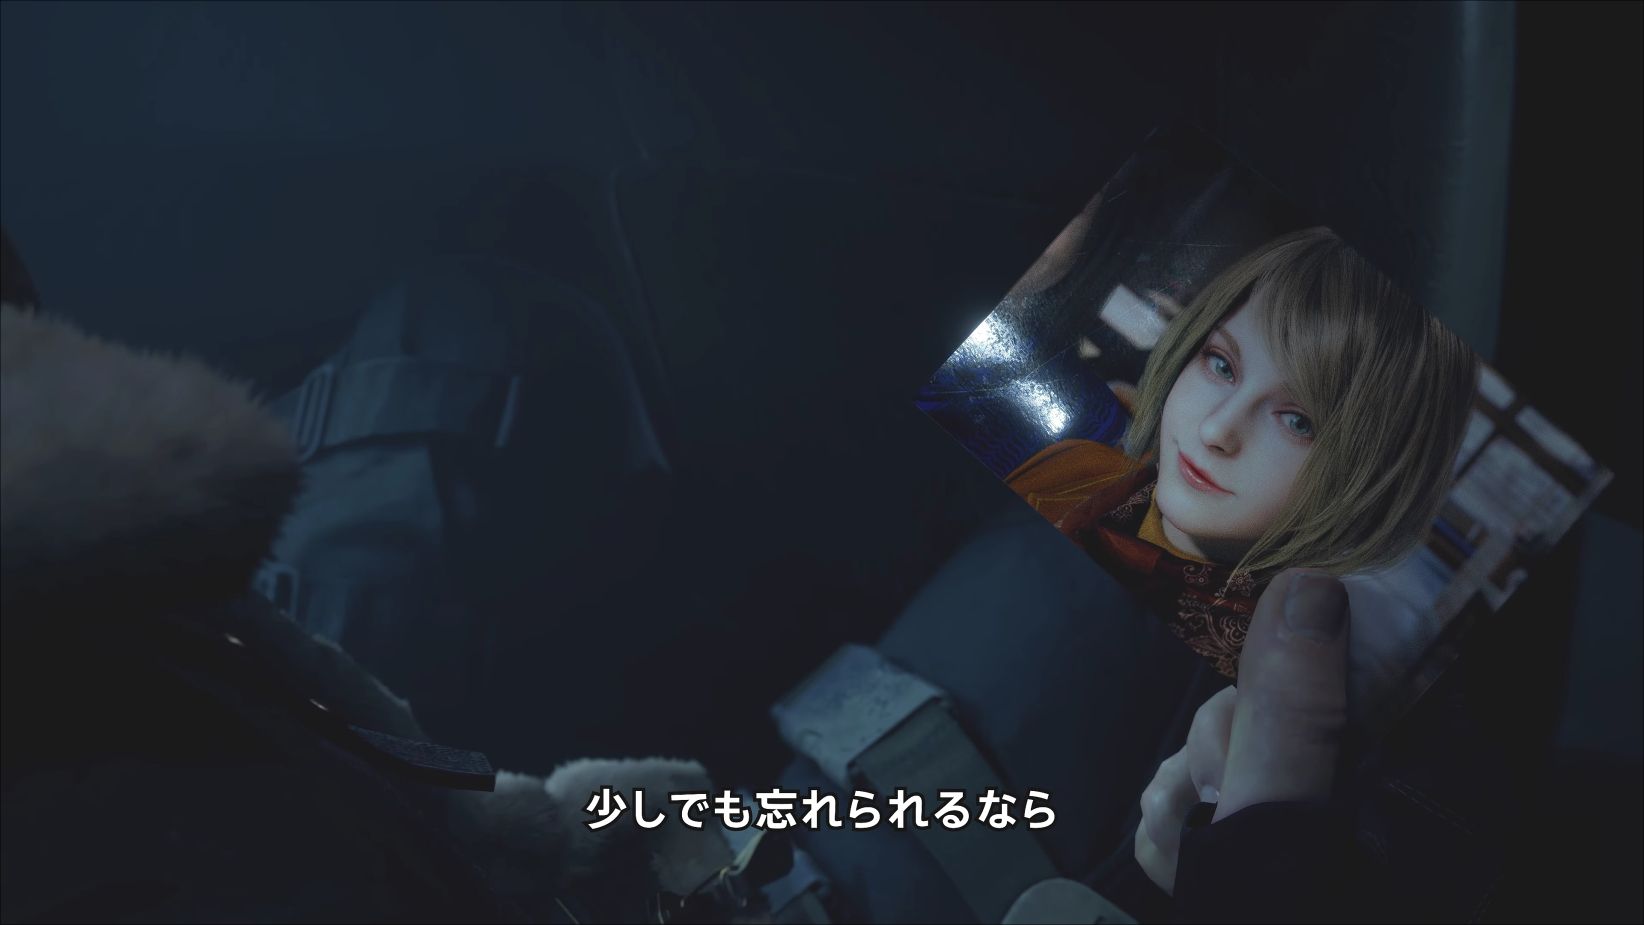 【Good news】Ashley in the new movie "Resident Evil RE: 4" is talked about as too cute 2